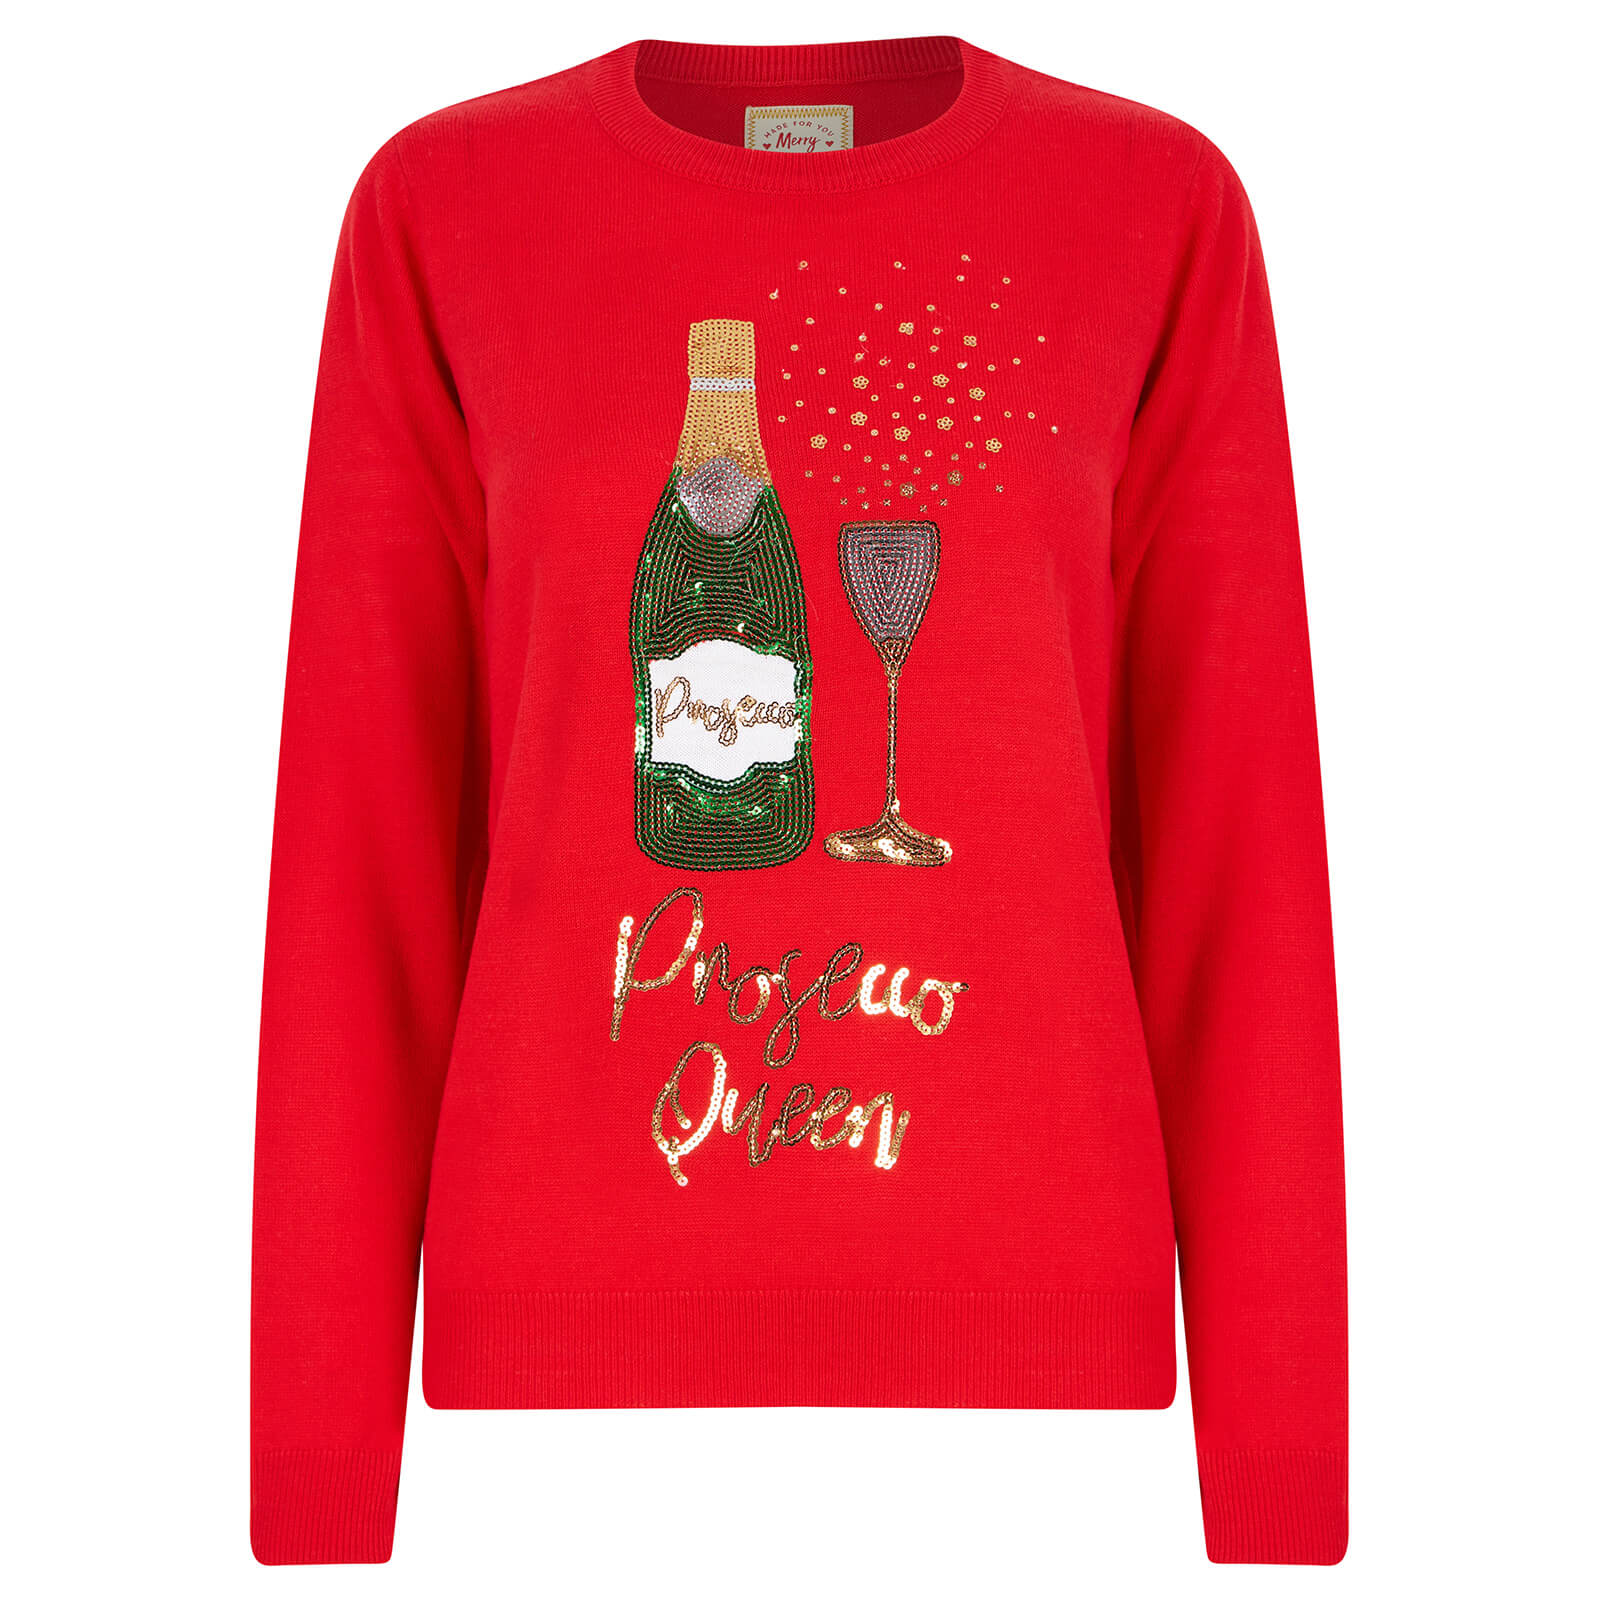 Mr Crimbo Womens Prosecco Queen Sequin Christmas Jumper - MrCrimbo.co.uk -SRG3A190201_A - Red -10